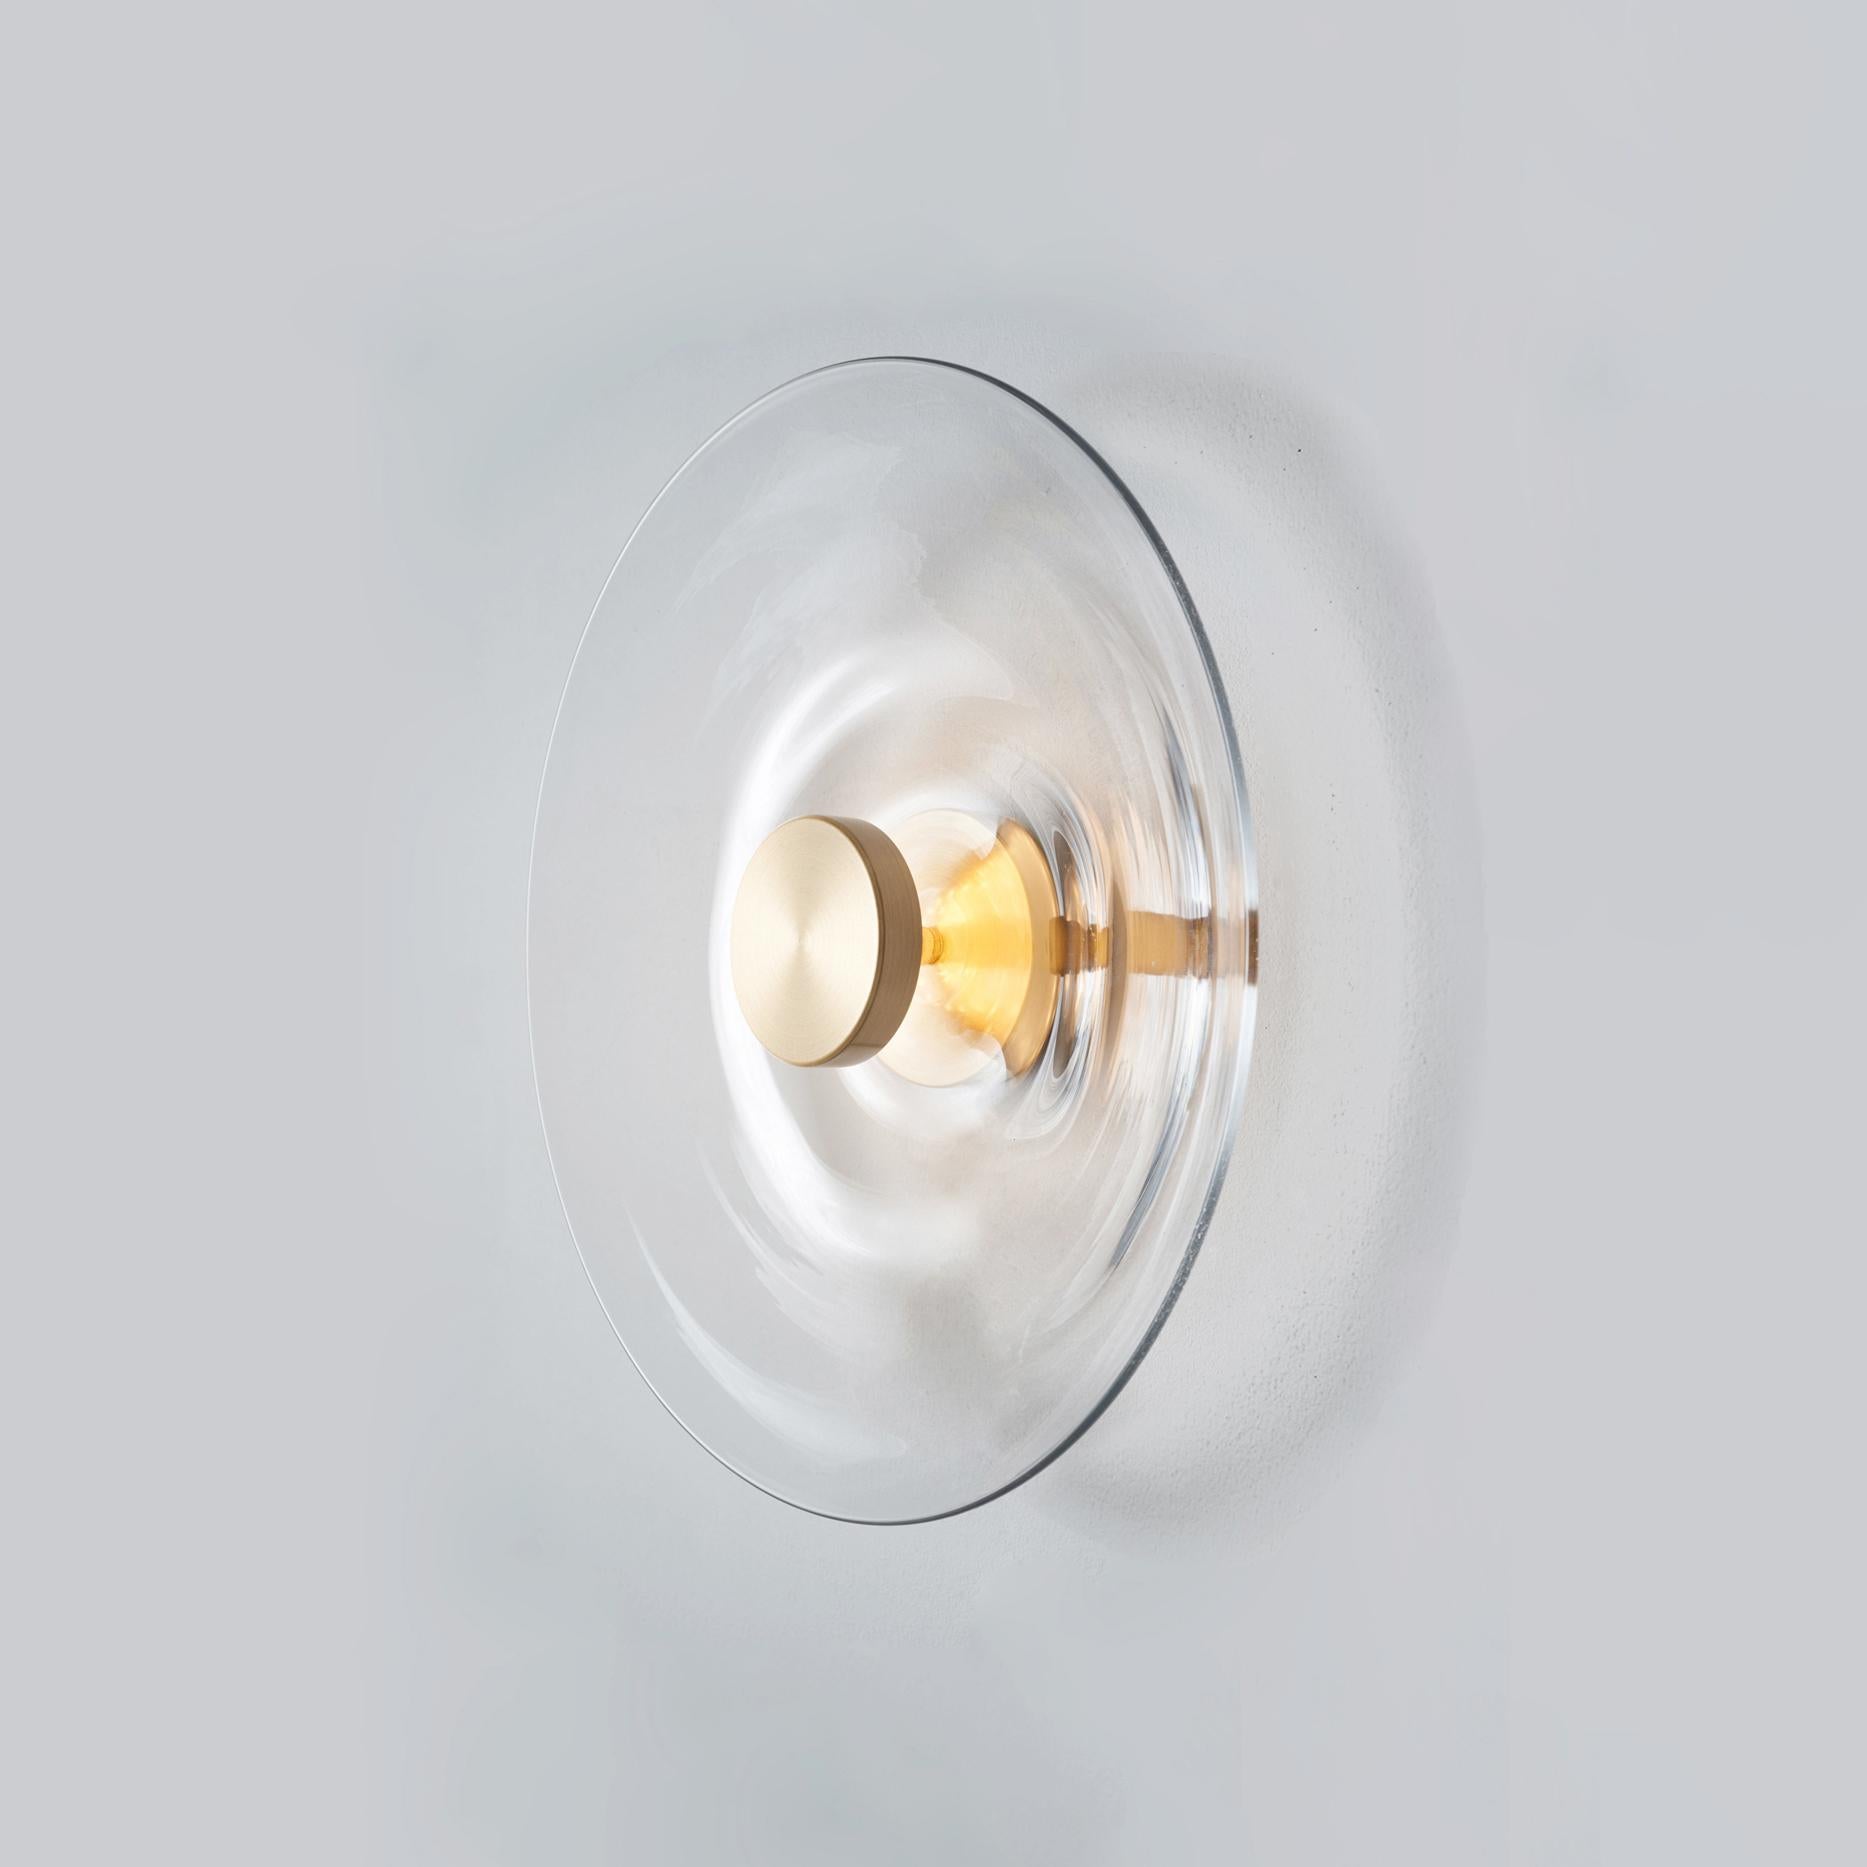 SAMPLE PAIR - 'Liquid Clear' Glass and Brass Contemporary Wall Light Sconce 2